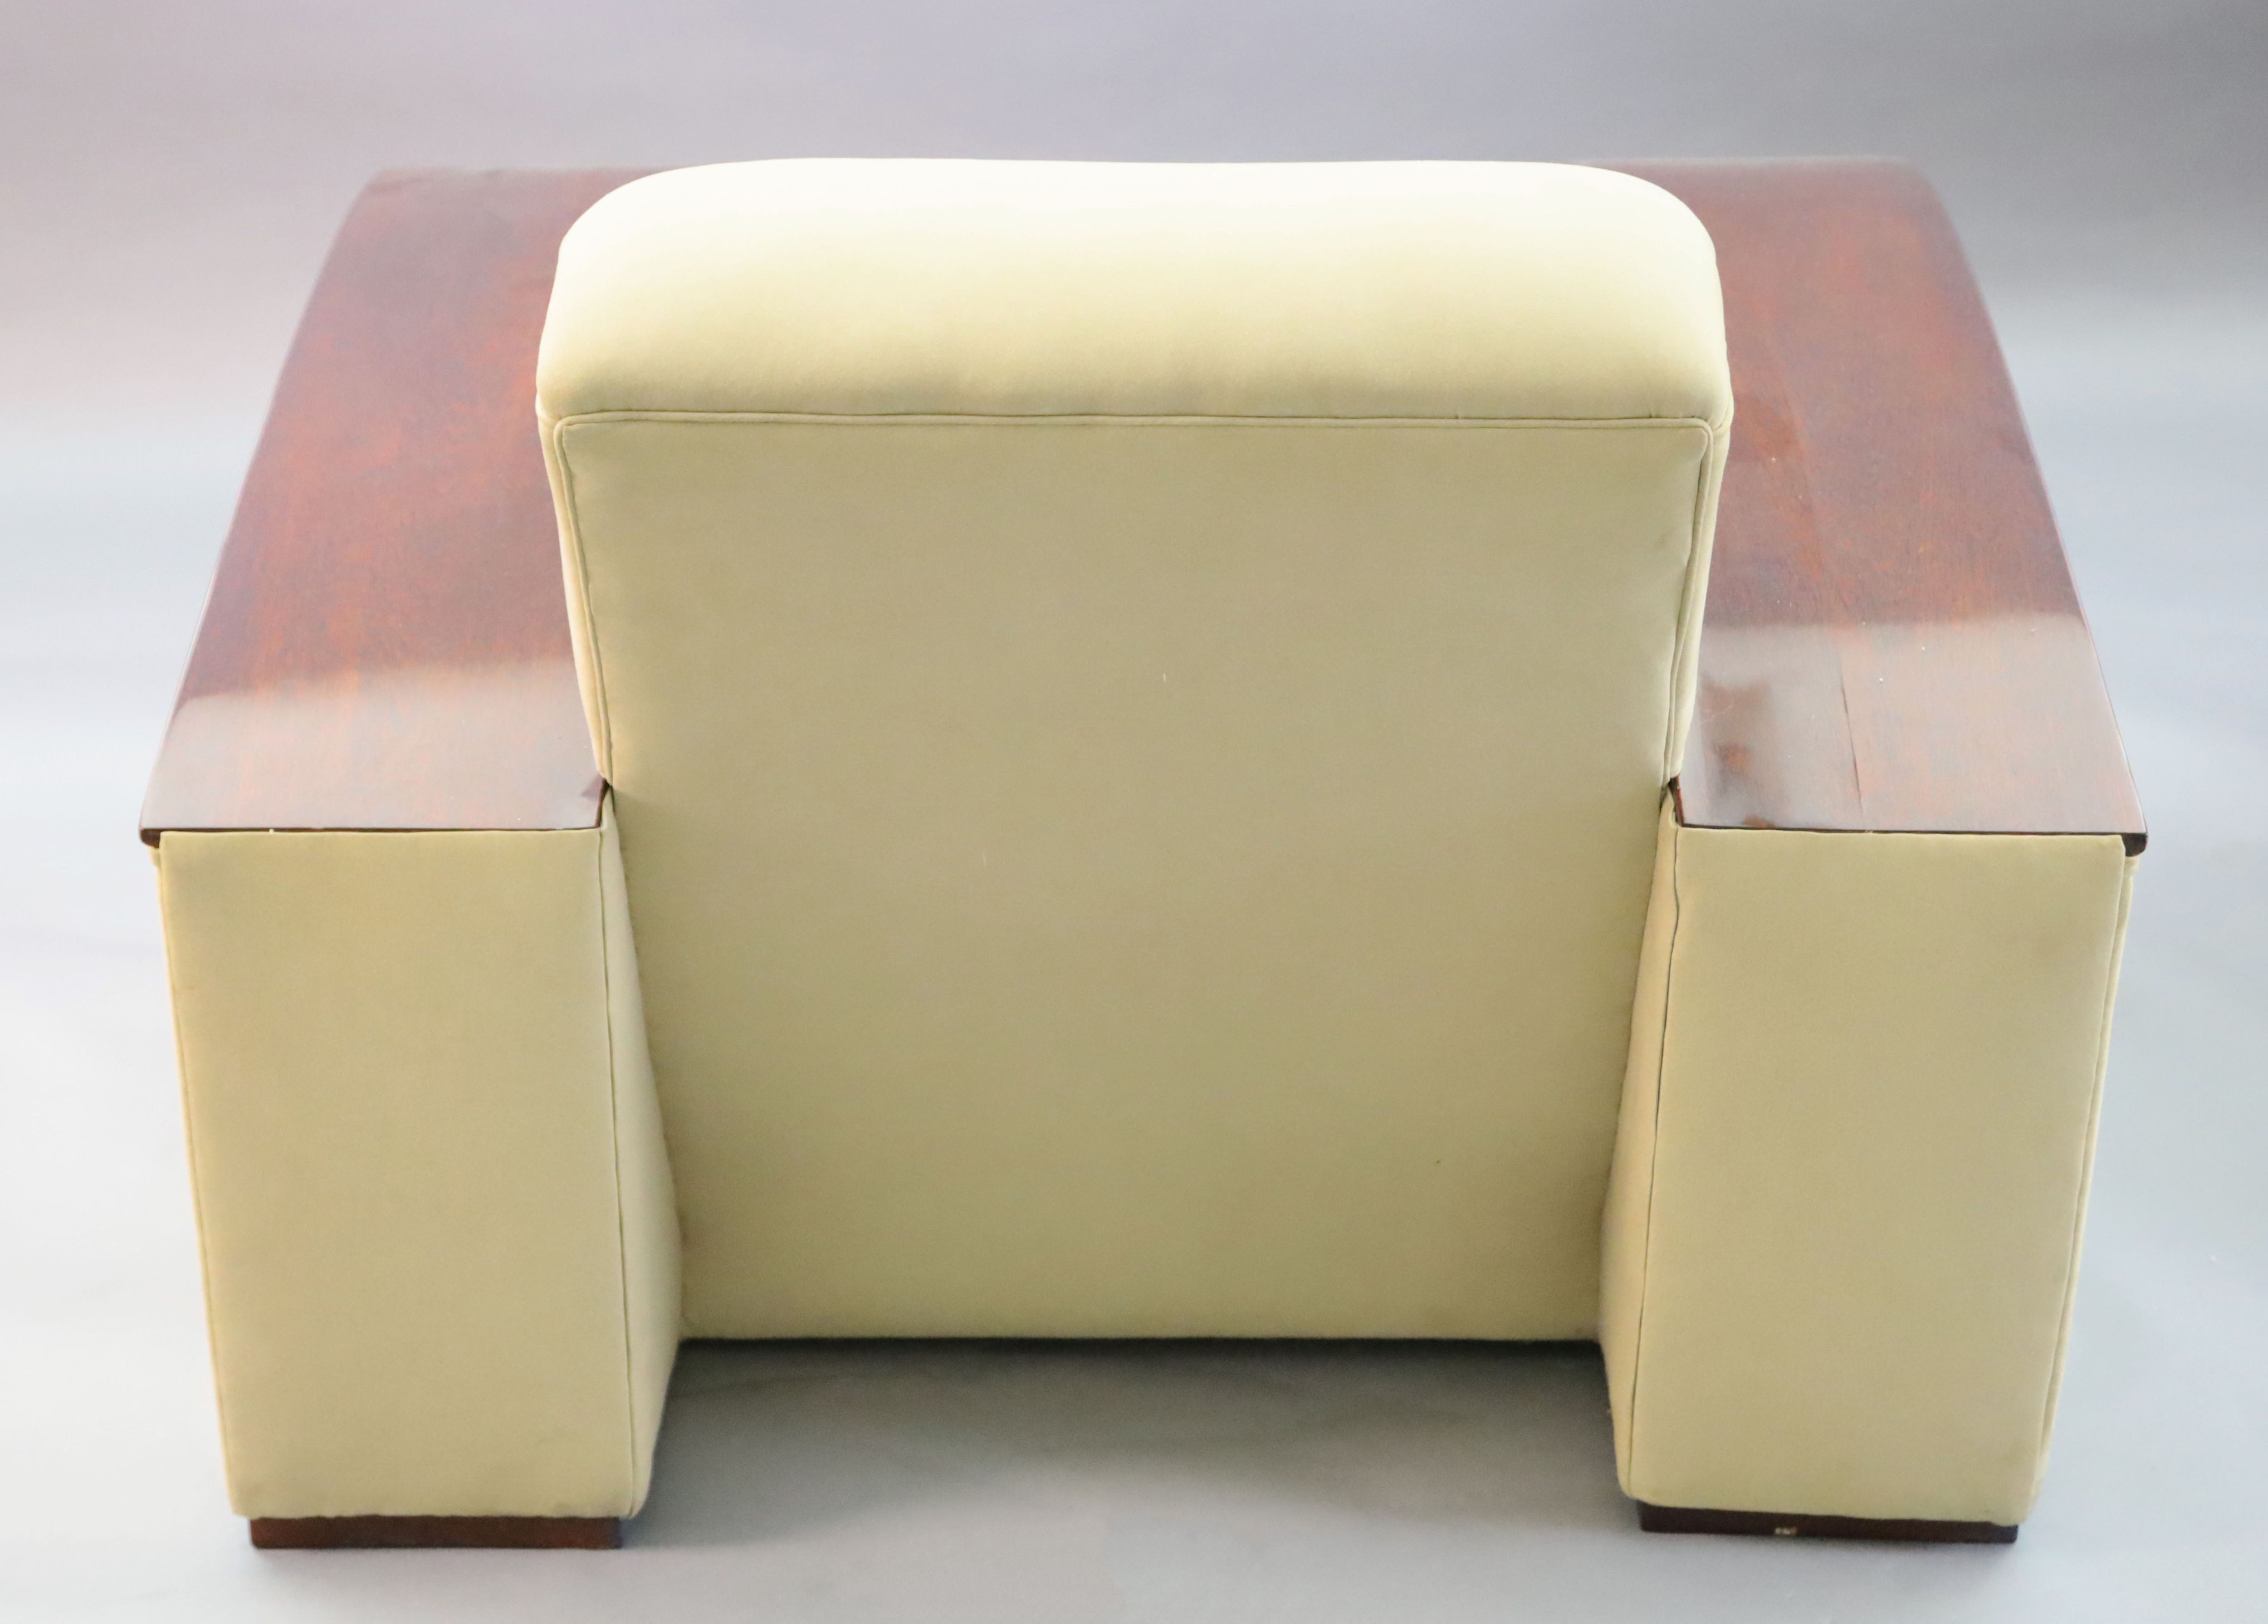 An Art Deco style mahogany and suede three piece suite, settee W.6ft 6in. D.3ft 4in. H.2ft 6in.